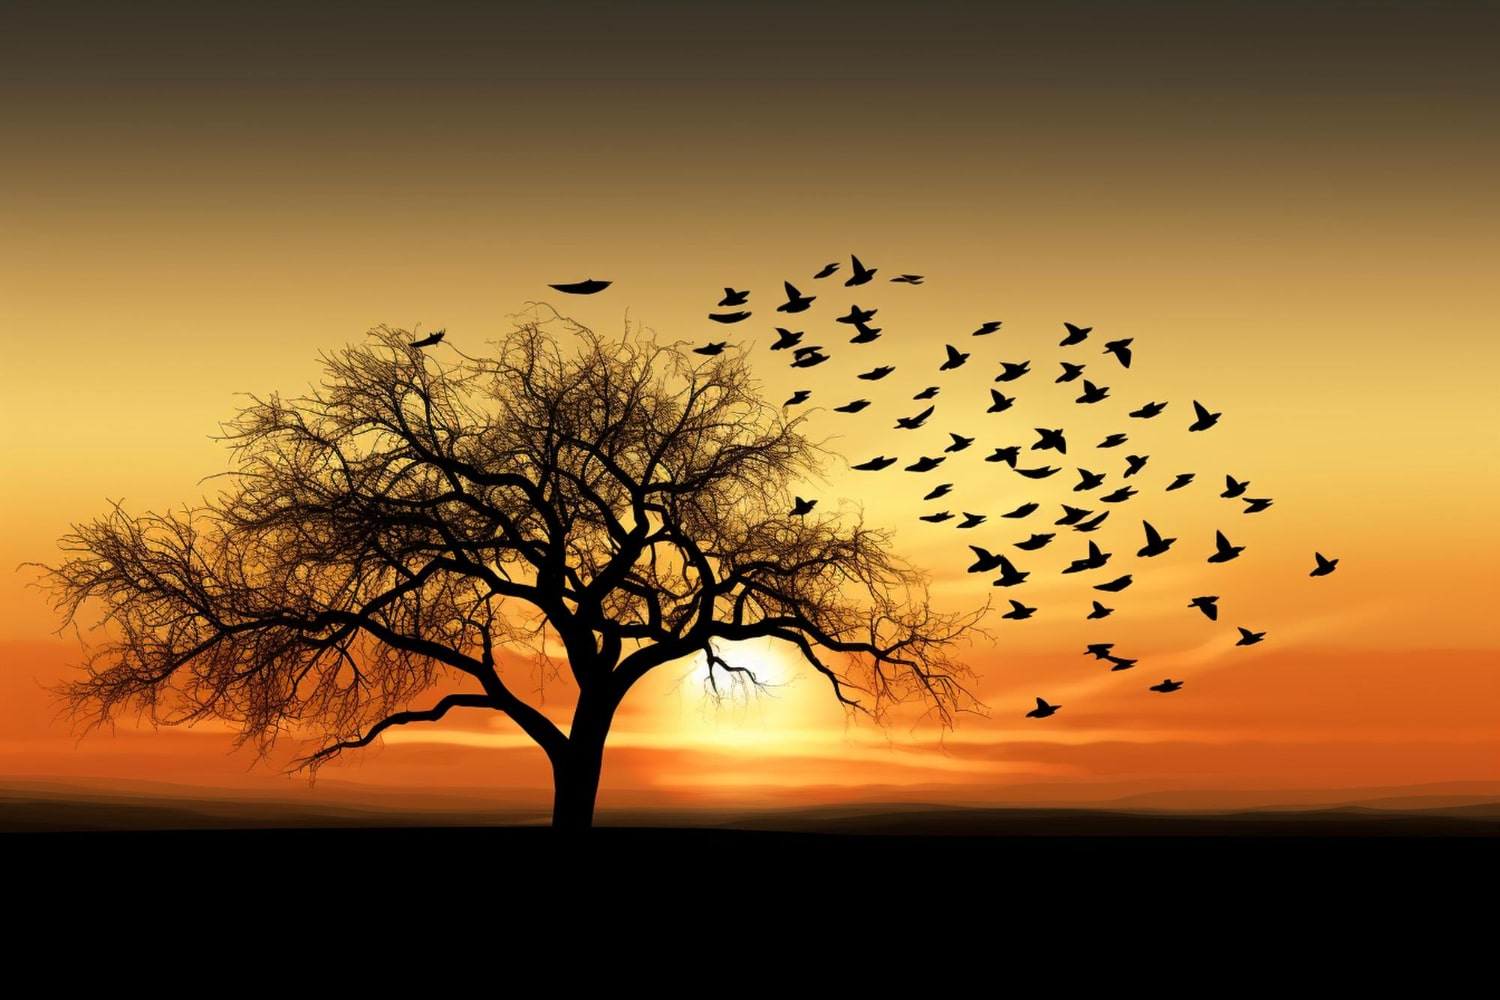 Birds flying from the tree during sun rise